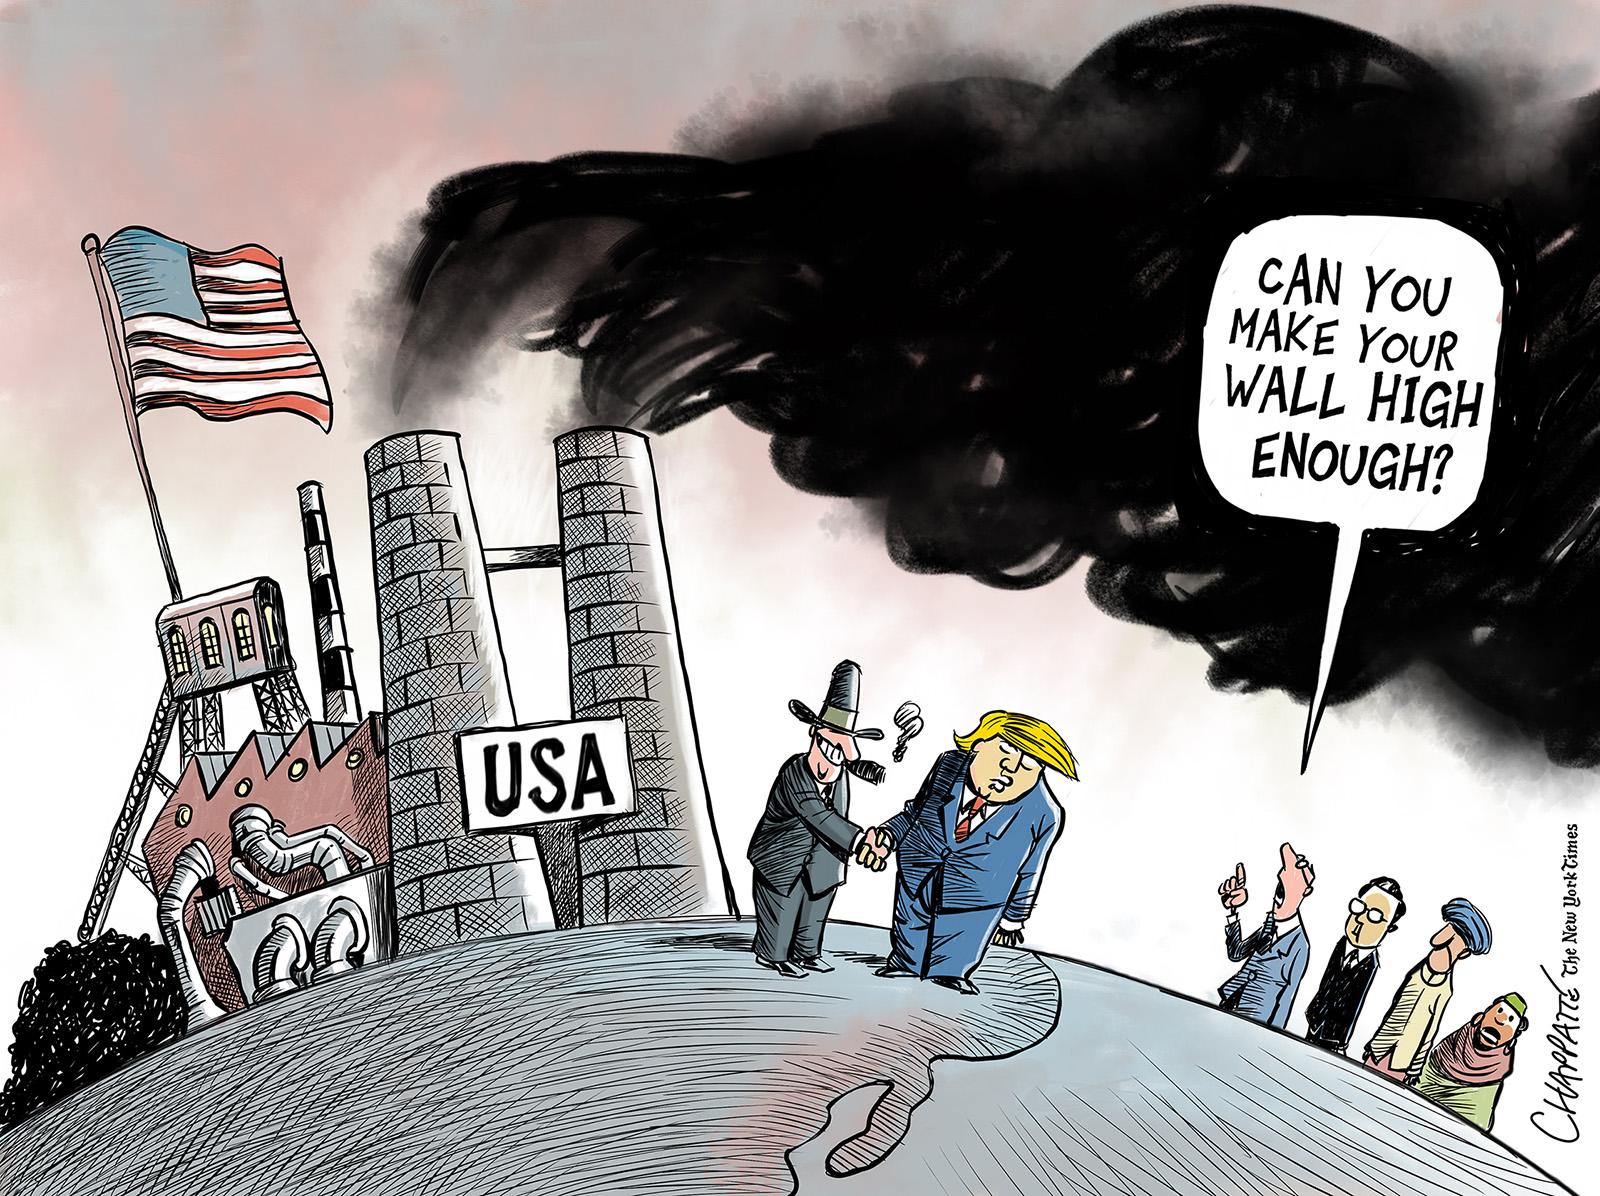 Trump leaves the climate accord